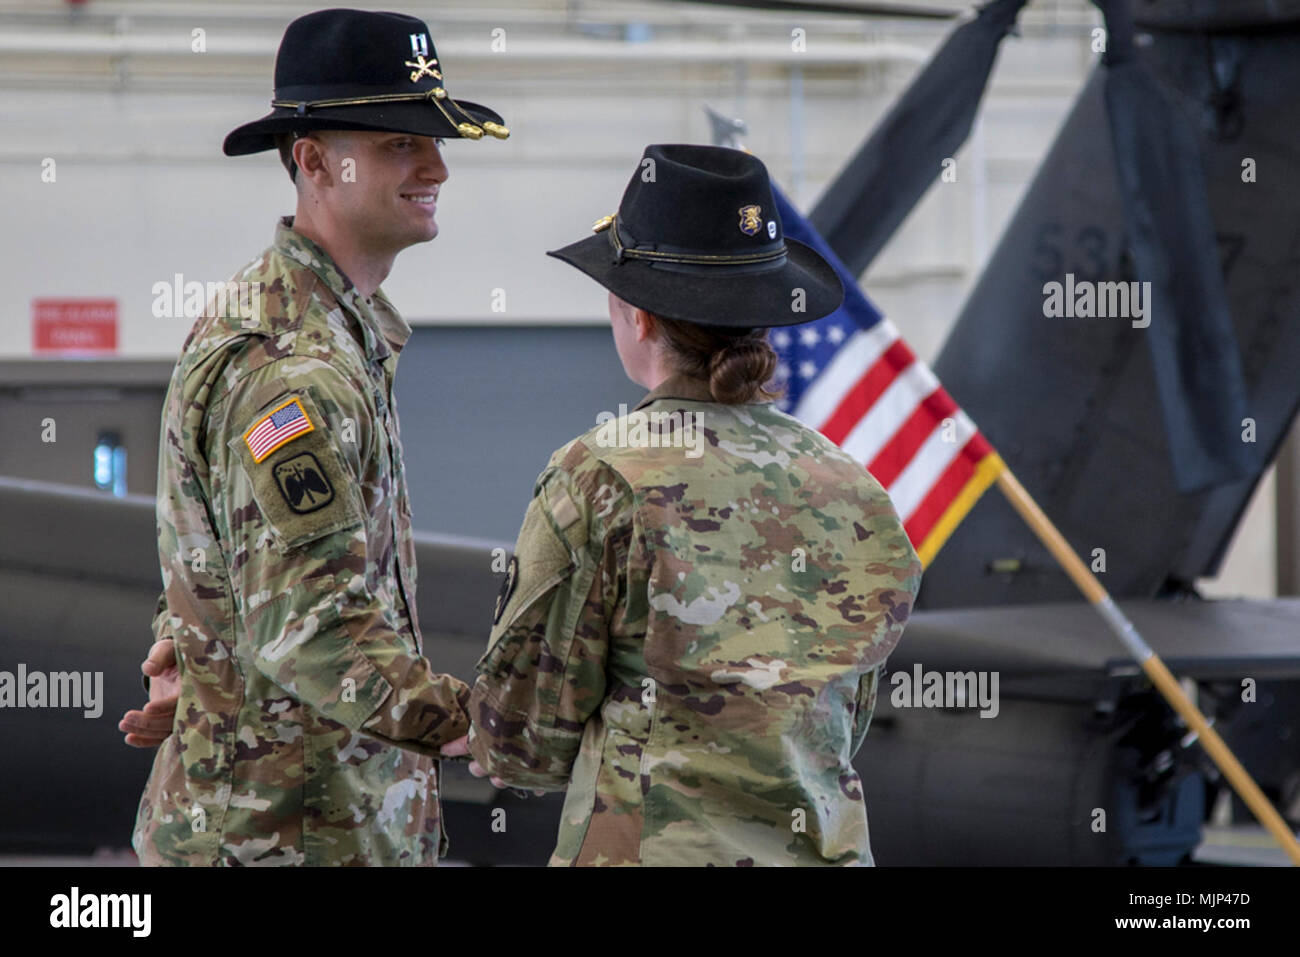 Capt. Jonathan Roberts, E Troop Commander with 4-6 Heavy Attack Reconnaissance Squadron, 16th Combat Aviation Brigade, shakes hands with Capt. Gretchen Gaskins, outgoing commander, after her final speech as the E Troop Commander during the Change of Command Ceremony at Joint Base Lewis-McChord, Wash., March 15, 2018. Gaskins led the Troop during their deployment the previous year. Armed Forces and civilians displaying courage bravery dedication commitment and sacrifice Stock Photo